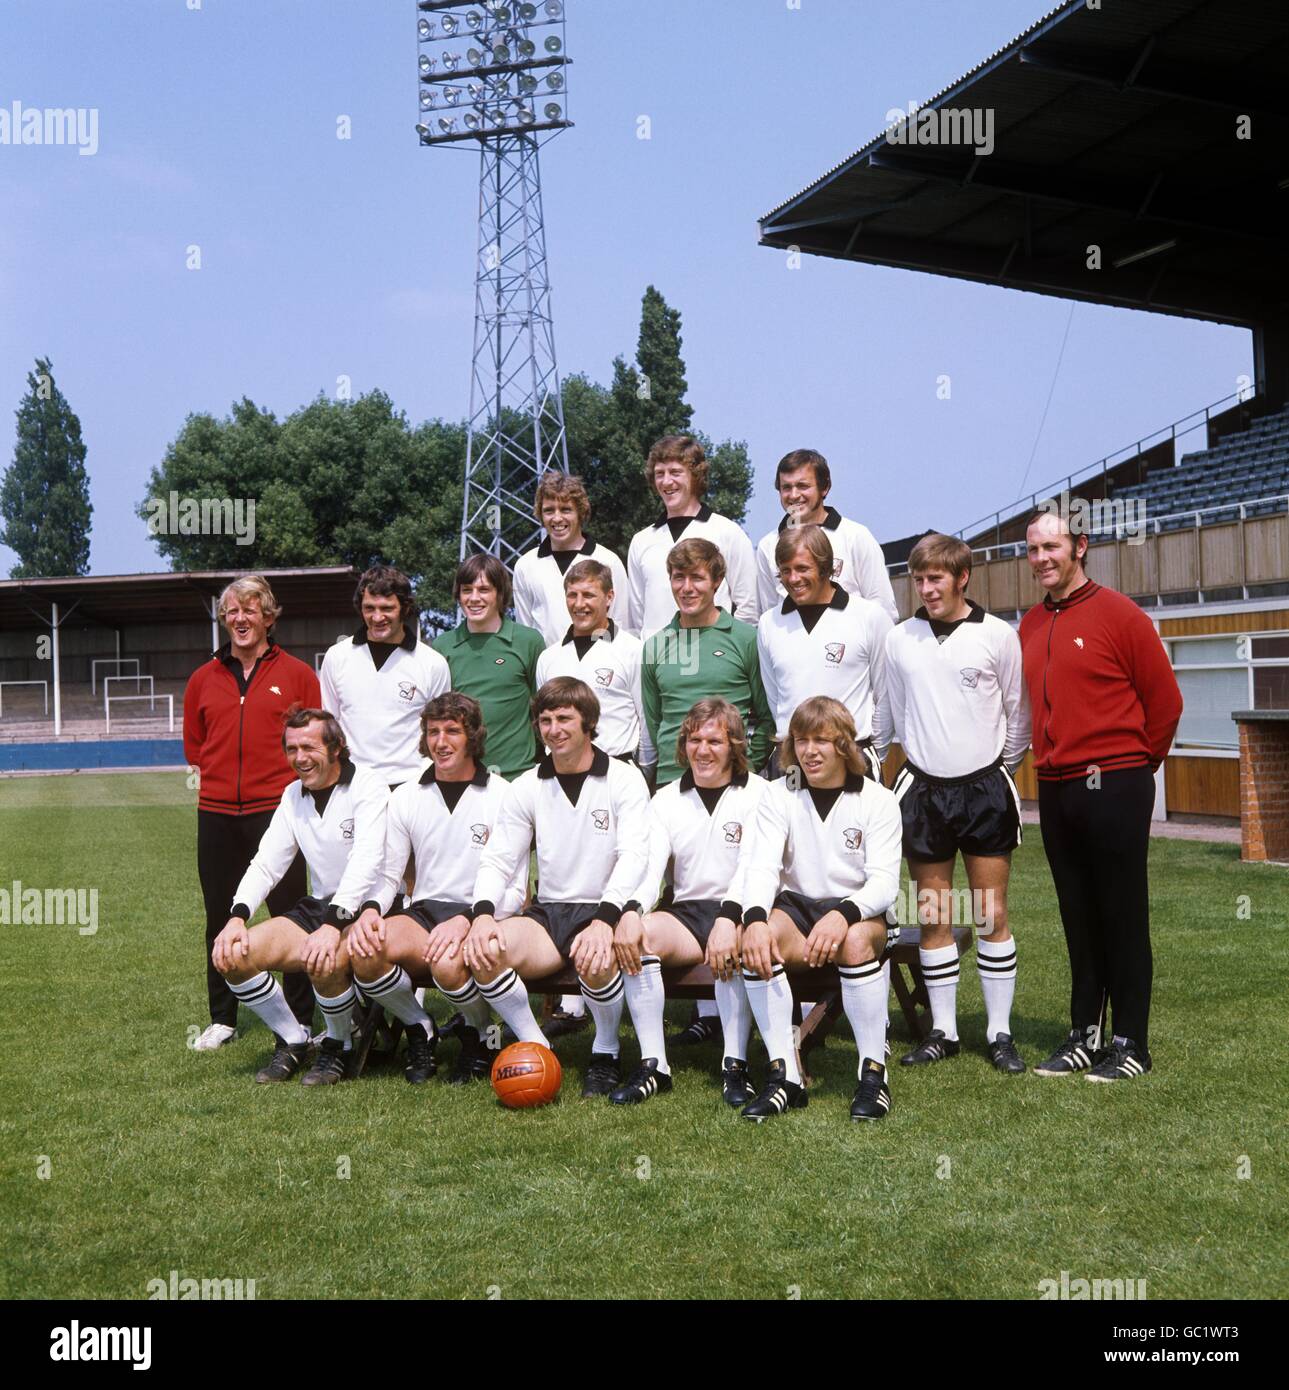 Hereford United Team Group. (top l-r) Clive Slattery, Mick McLaughlin and Tommy Taylor. (middle row l-r) John Barnwell (assistant manager), Ken Mallender, David Icke, Colin Tavener, Fred Potter, Alan Jones, Roger Griffiths and Peter Isaac (trainer). (front row l-r) Brian Owen, Ivan Hollett, Colin Addison (player managers), George Johnston and Trevor Jones. Stock Photo